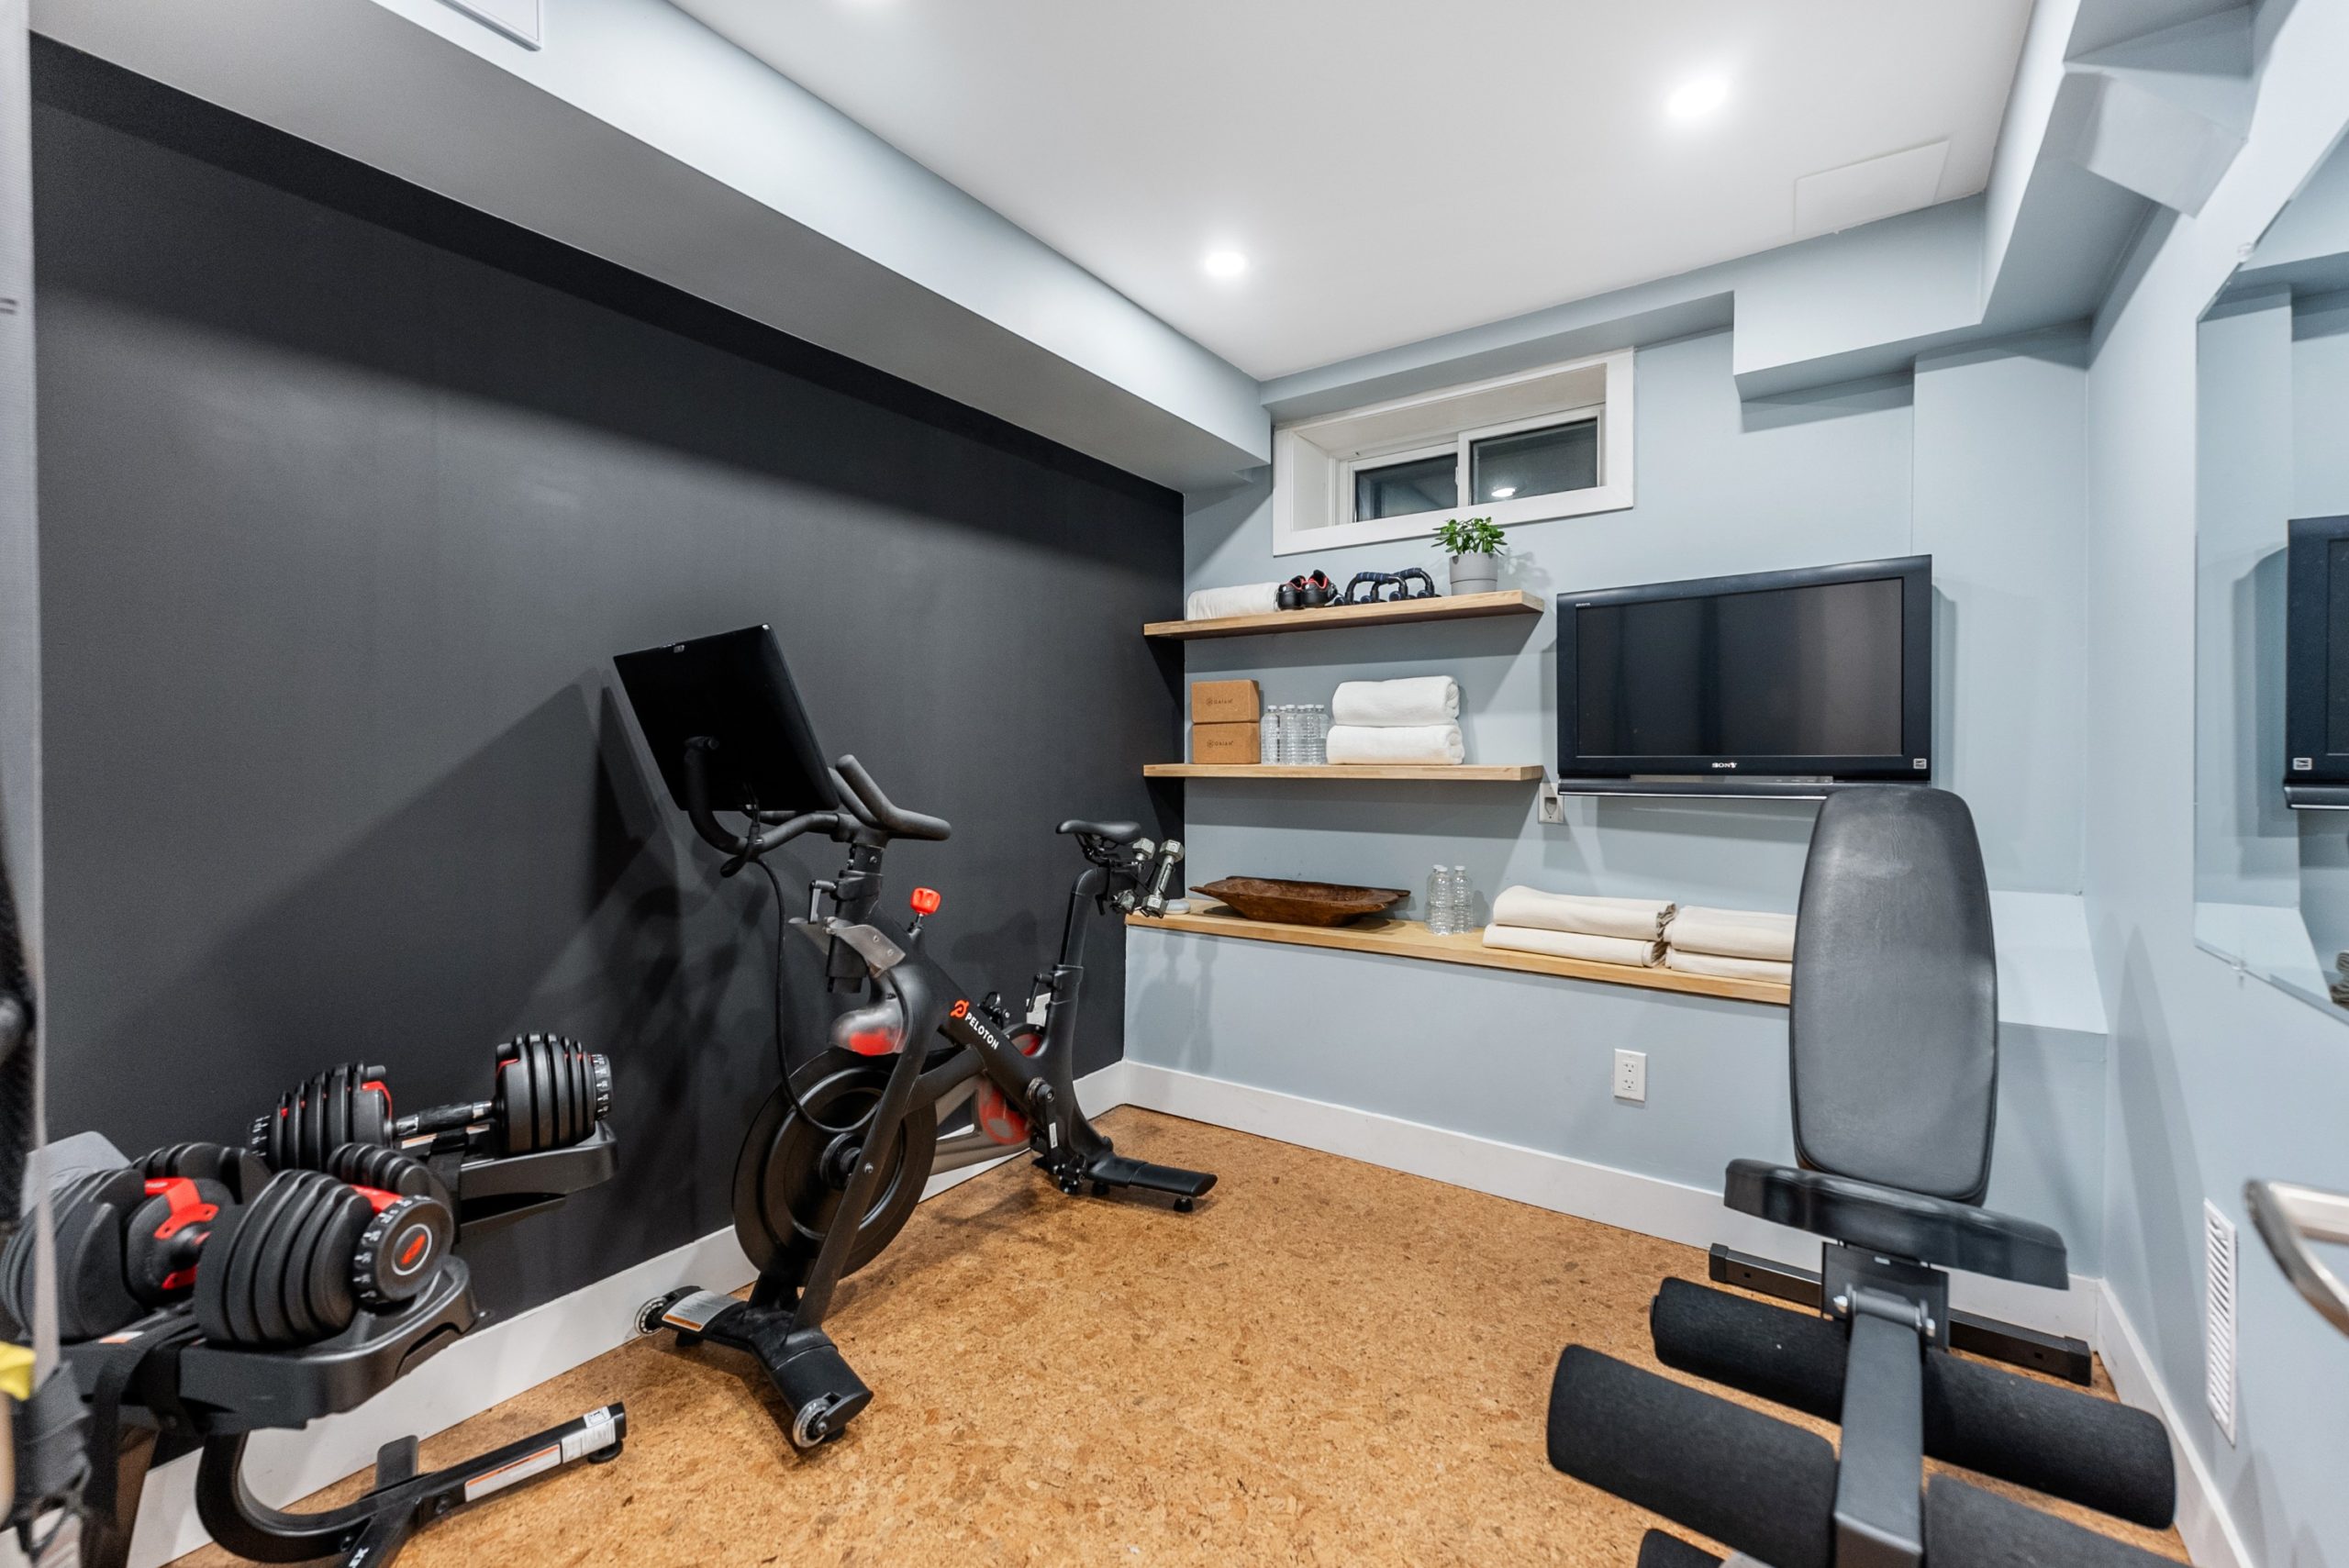 This exercise space could be converted into a guest room, office or lounge.